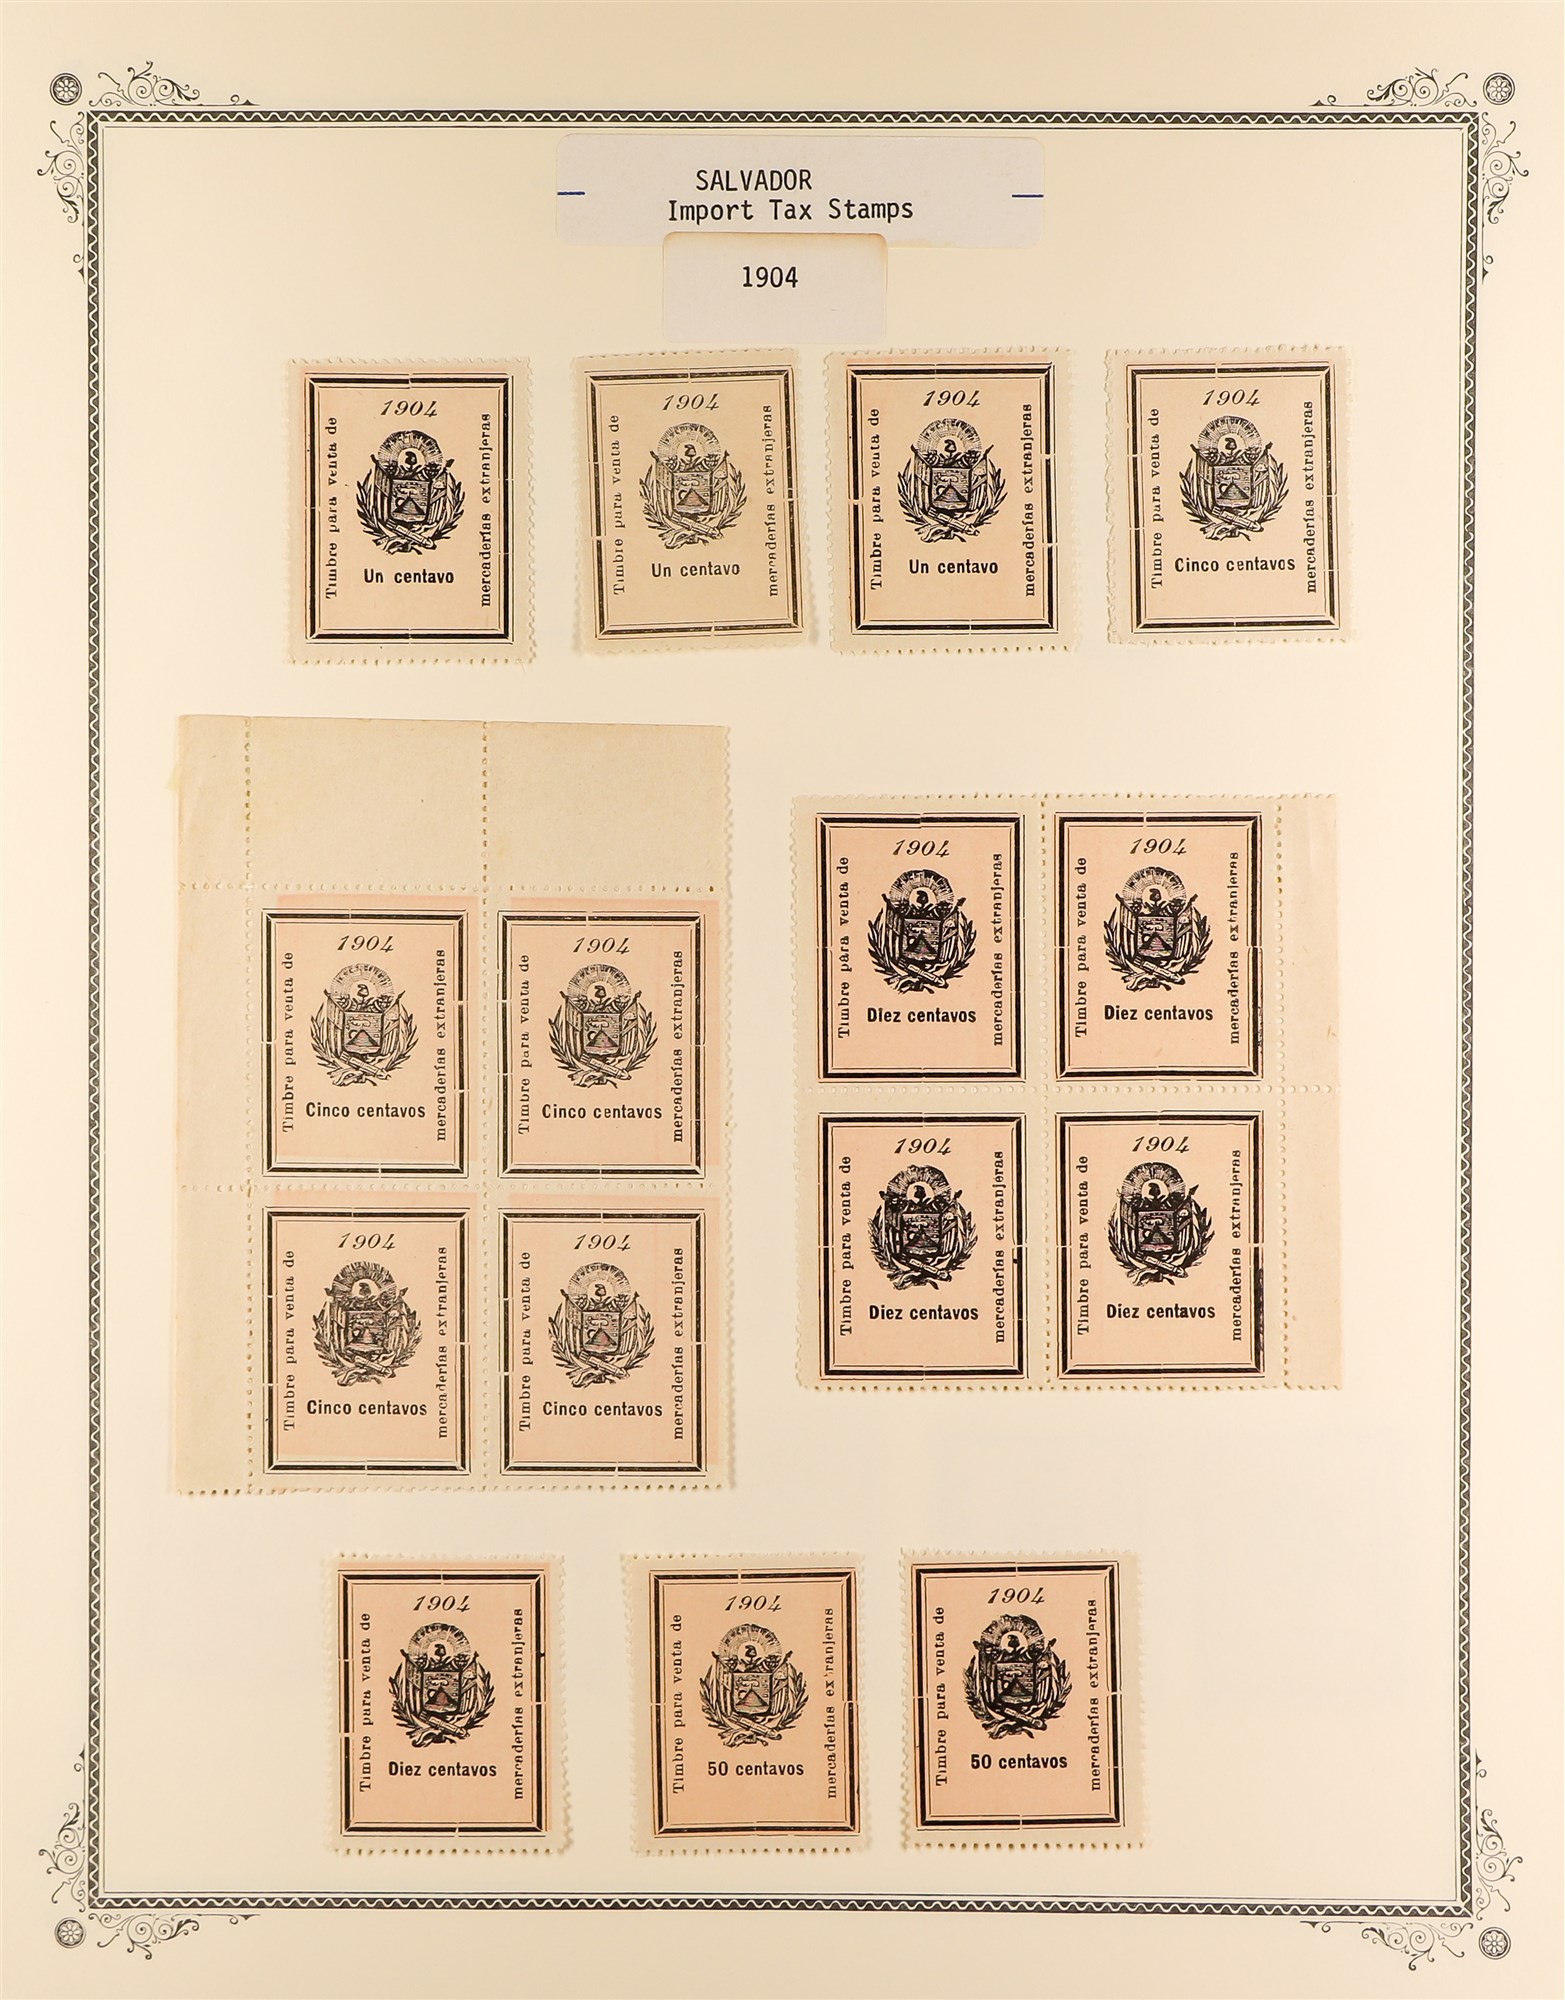 EL SALVADOR REVENUE STAMPS 1883 - 1925 mint & used collection of over 400 revenue stamps, on album - Image 7 of 27